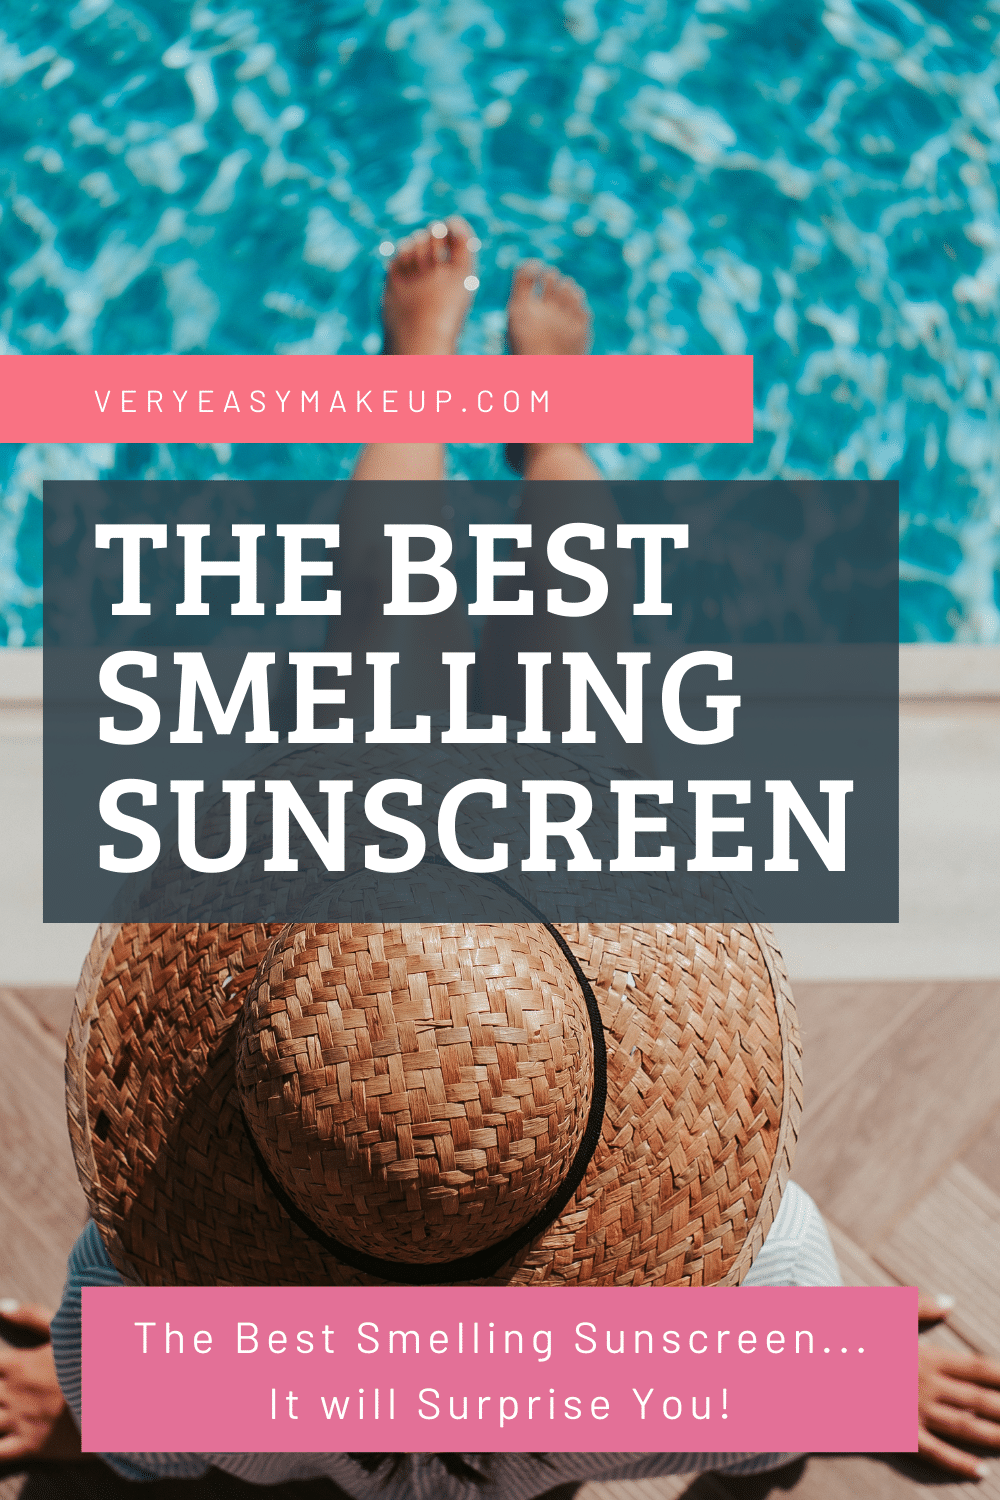 The Best Smelling Sunscreen by Very Easy Makeup